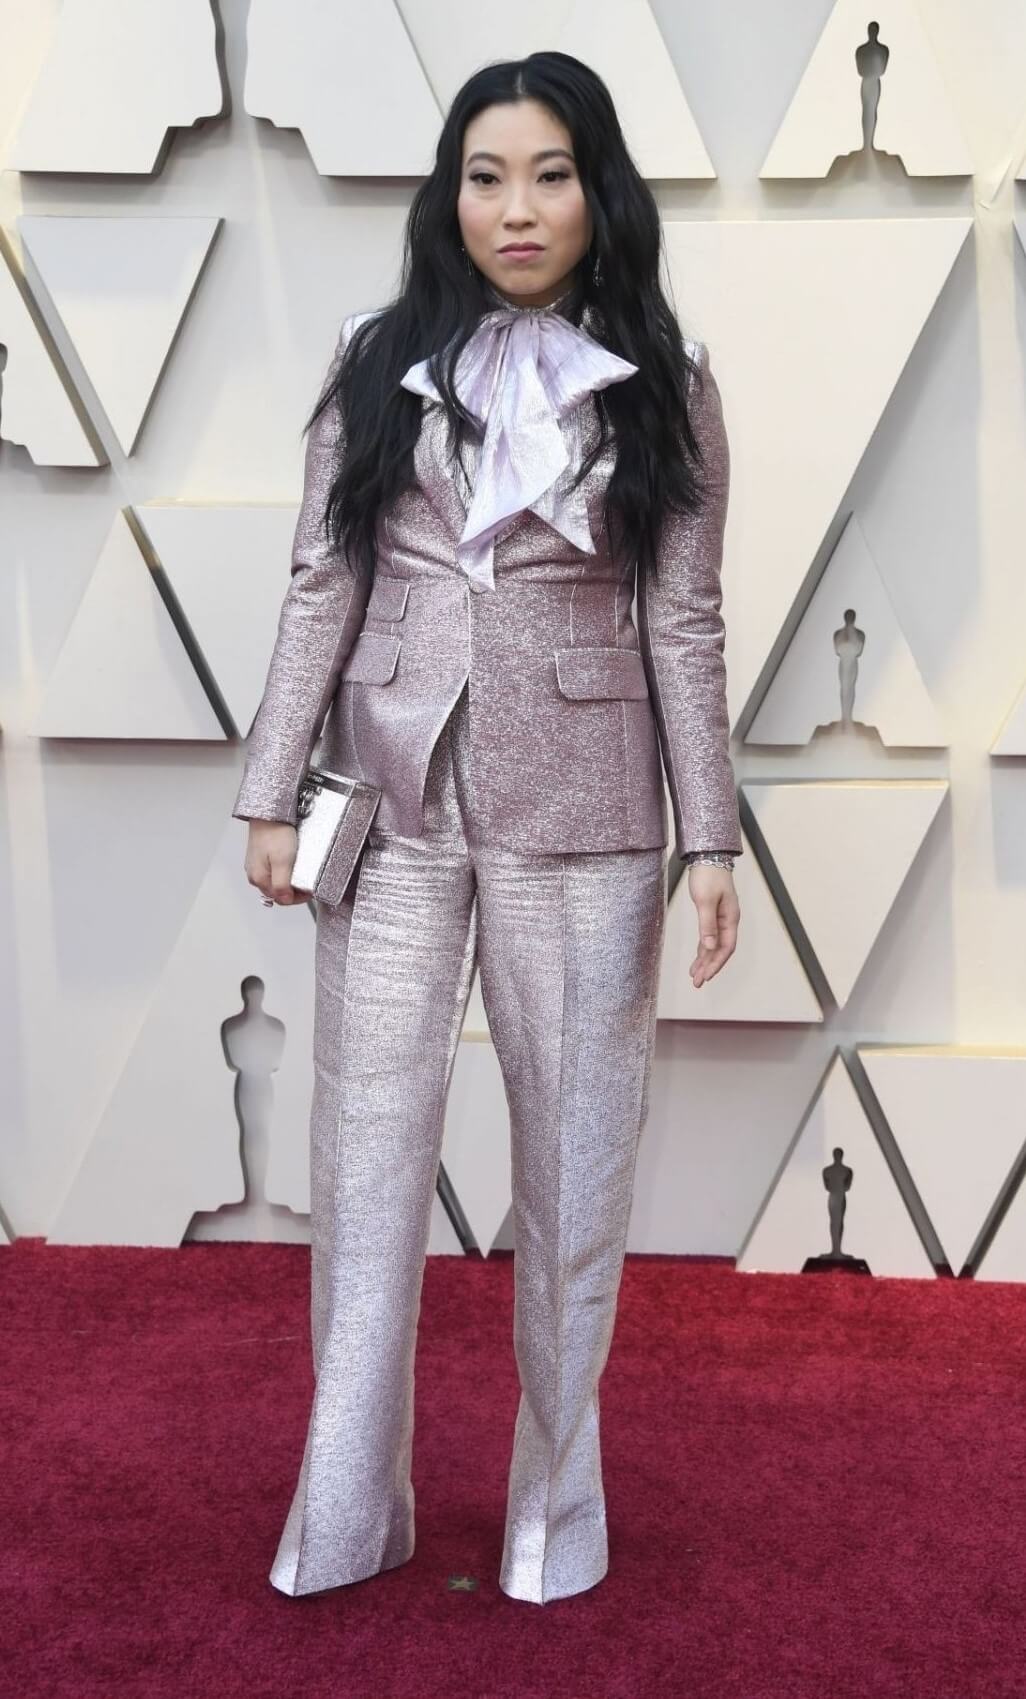 Awkwafina In Lavender Shimmery Blazer & Silver Pants With Bow Style At Oscars  Red Carpet